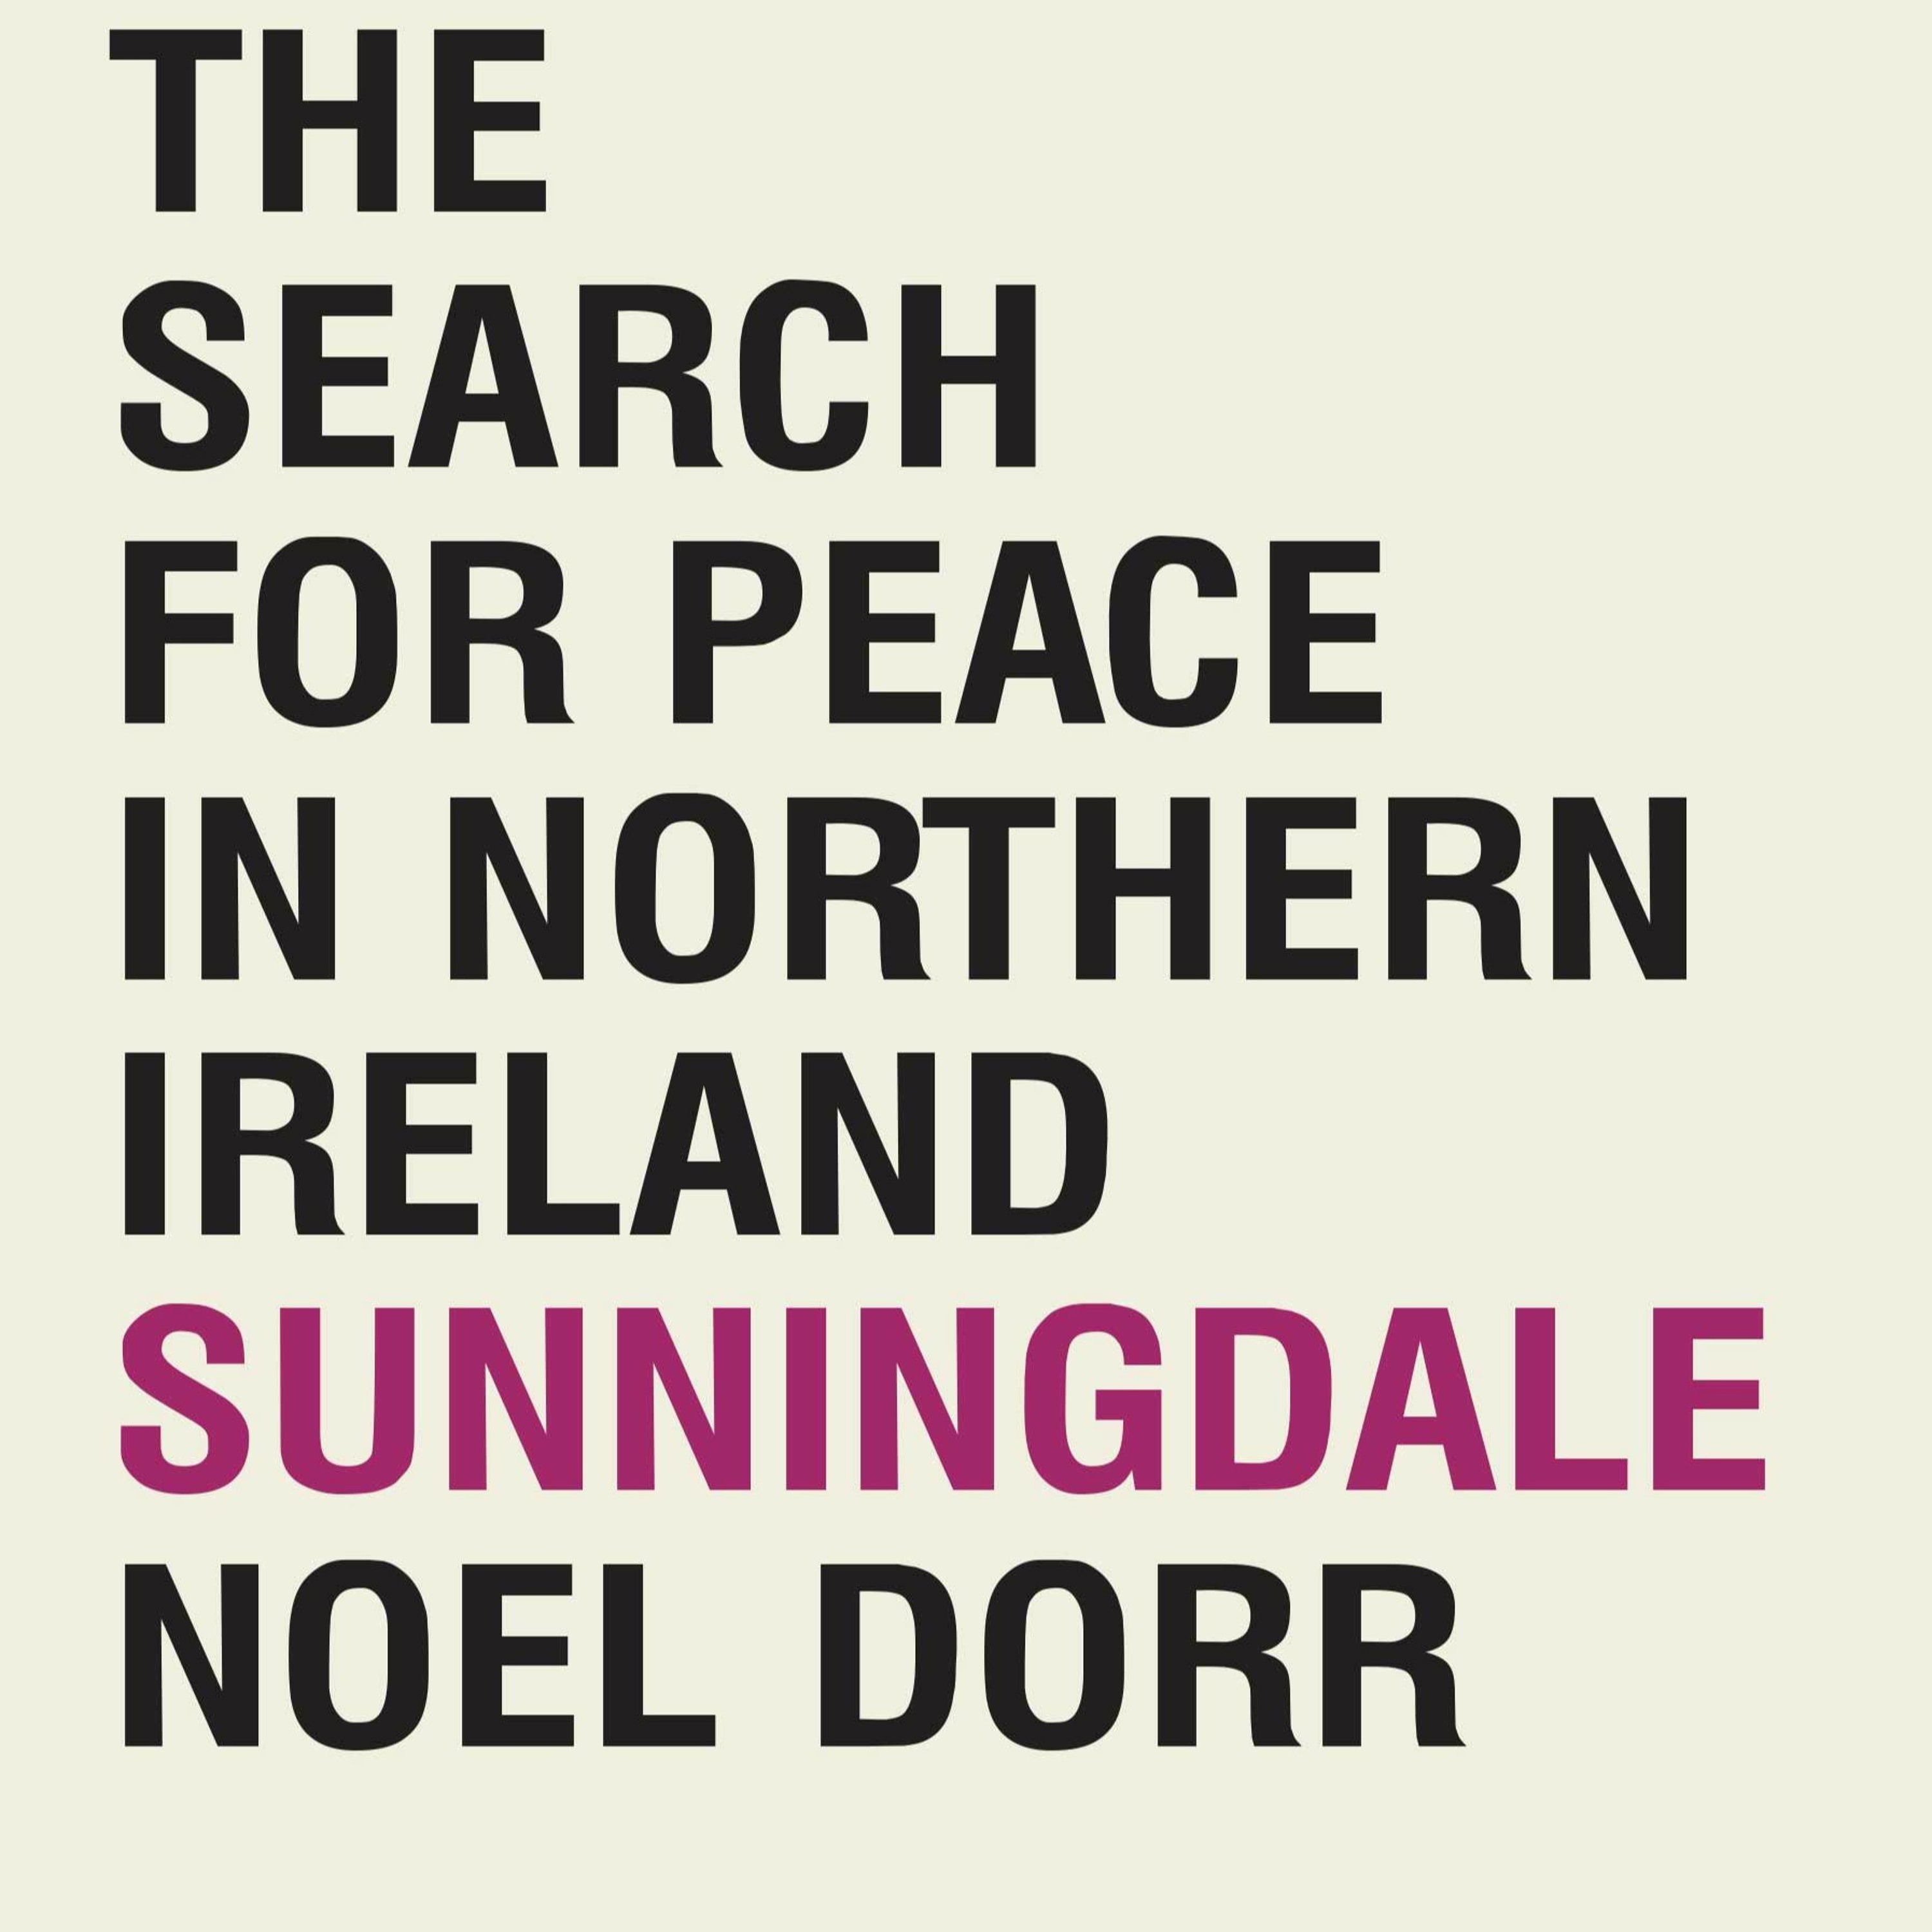 Sunningdale: the search for peace in Northern Ireland